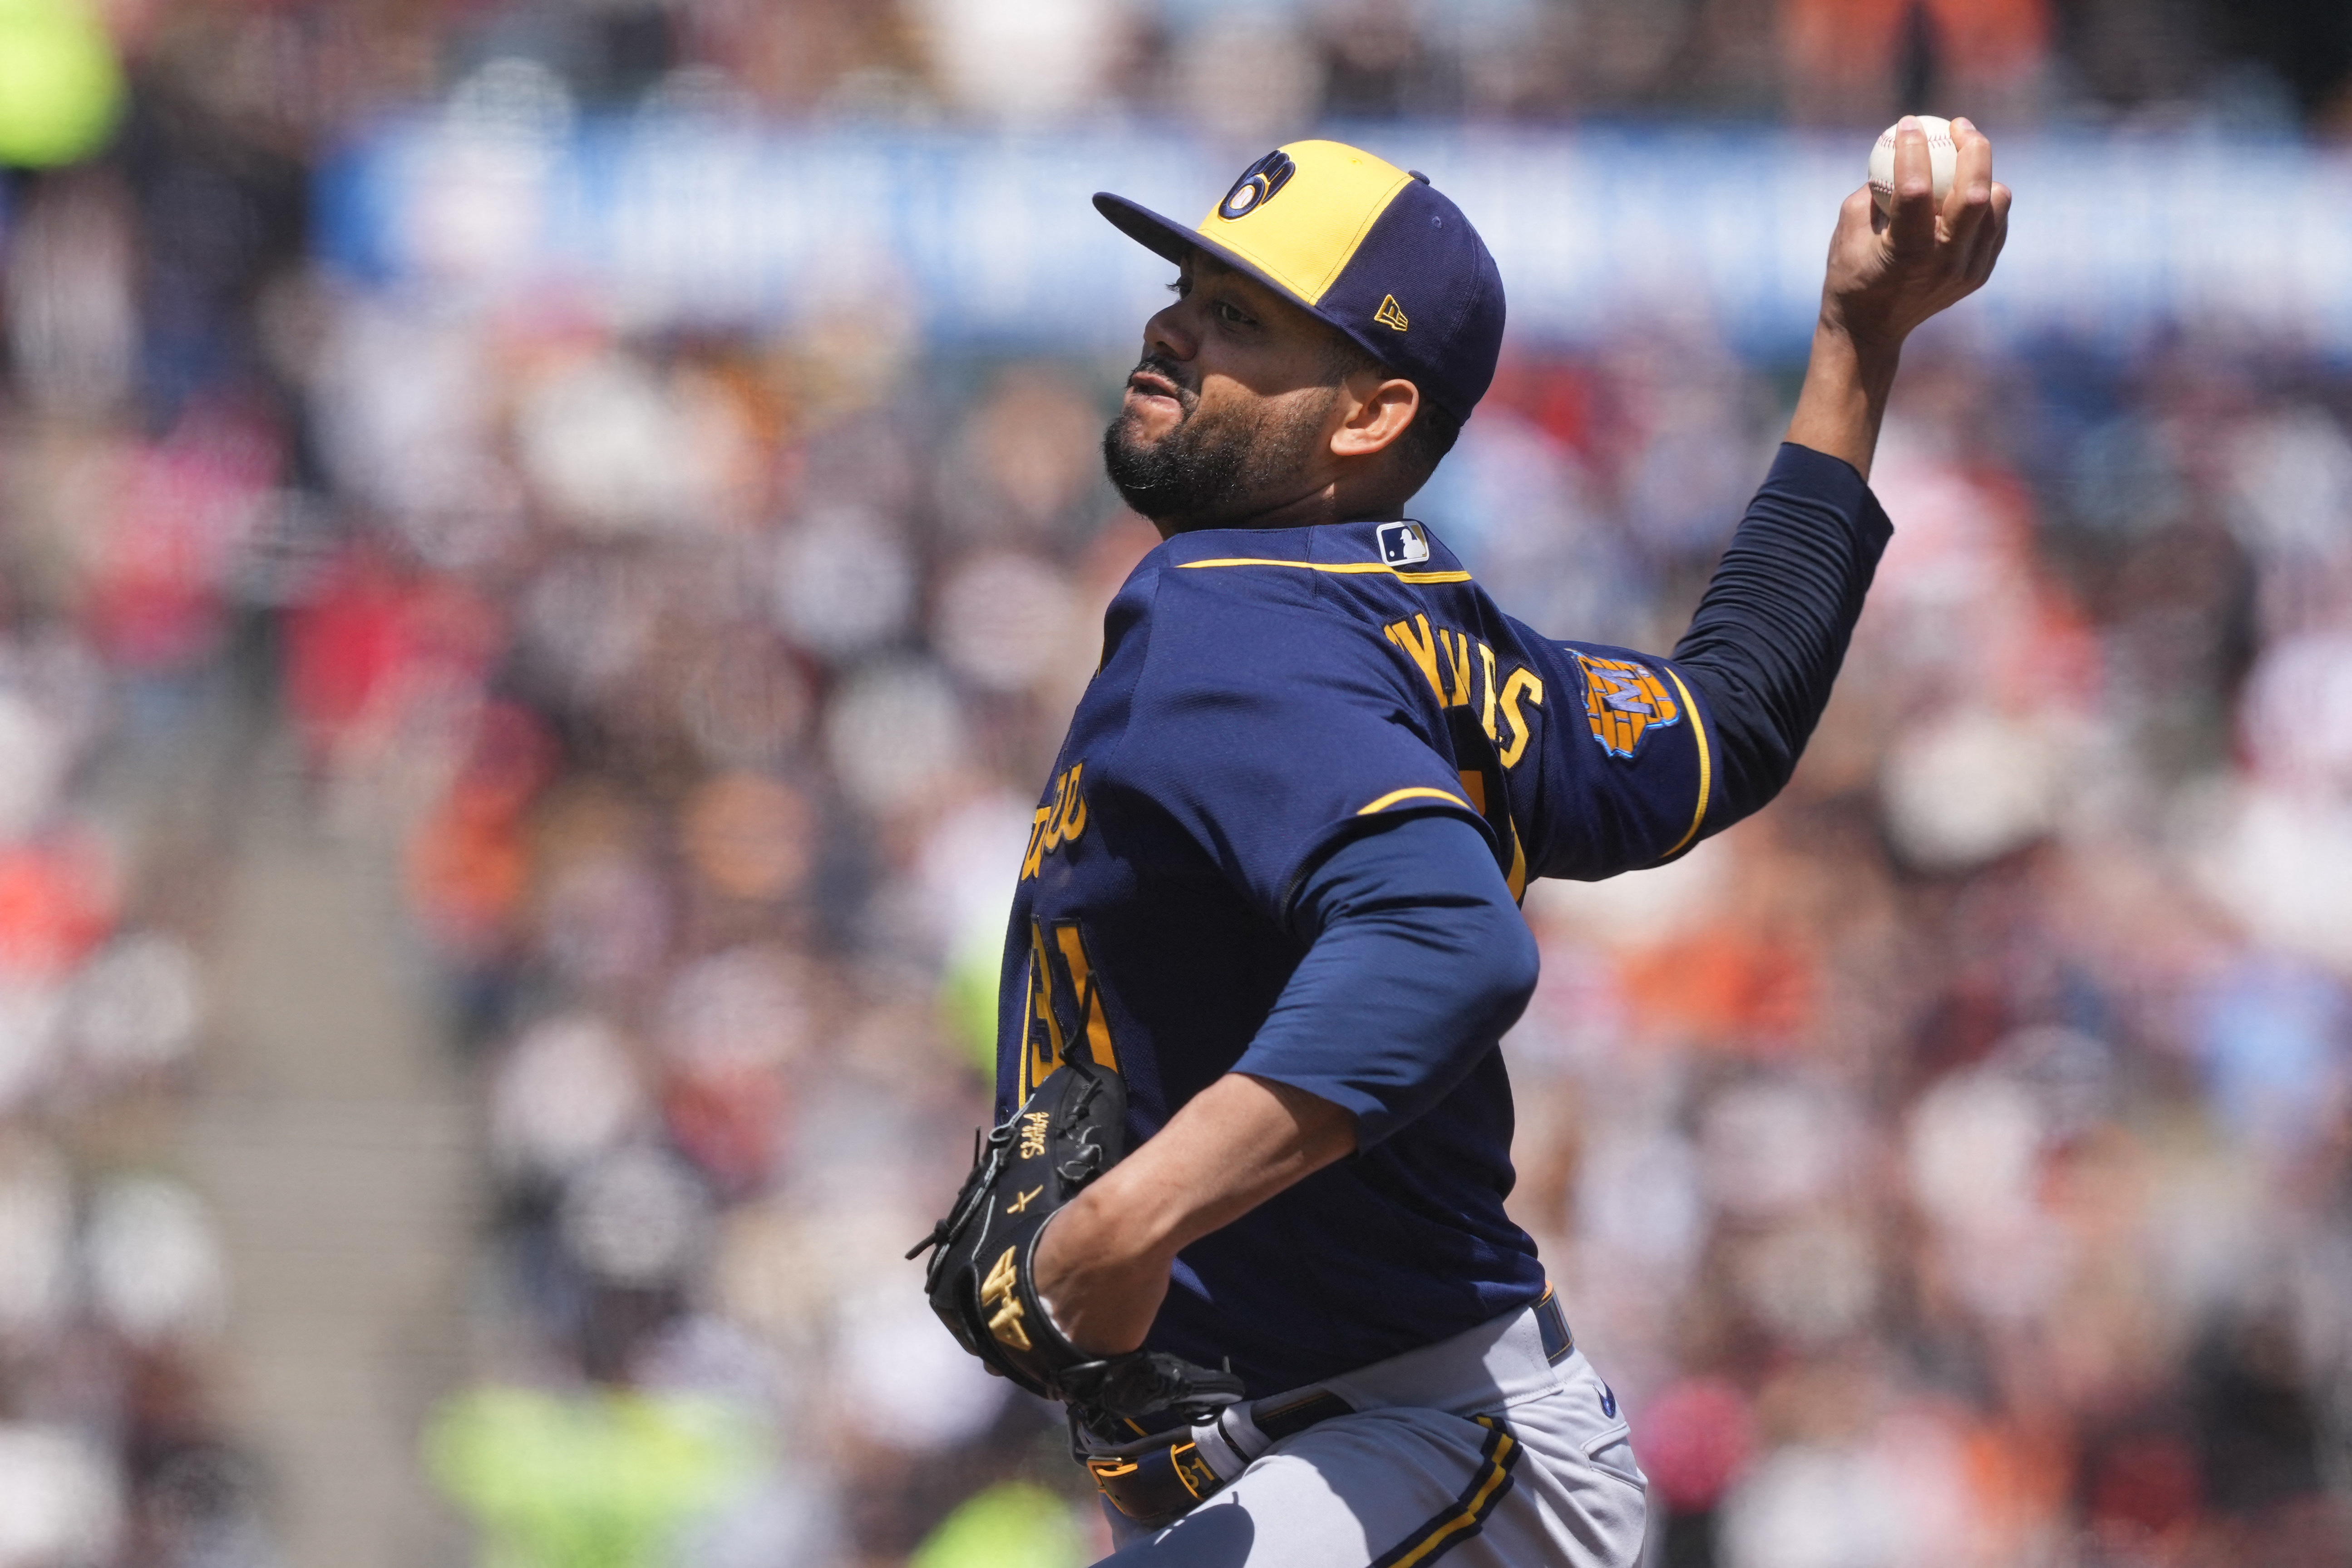 Brewers end 6-game skid with 7-3 victory over Giants - ABC7 San Francisco